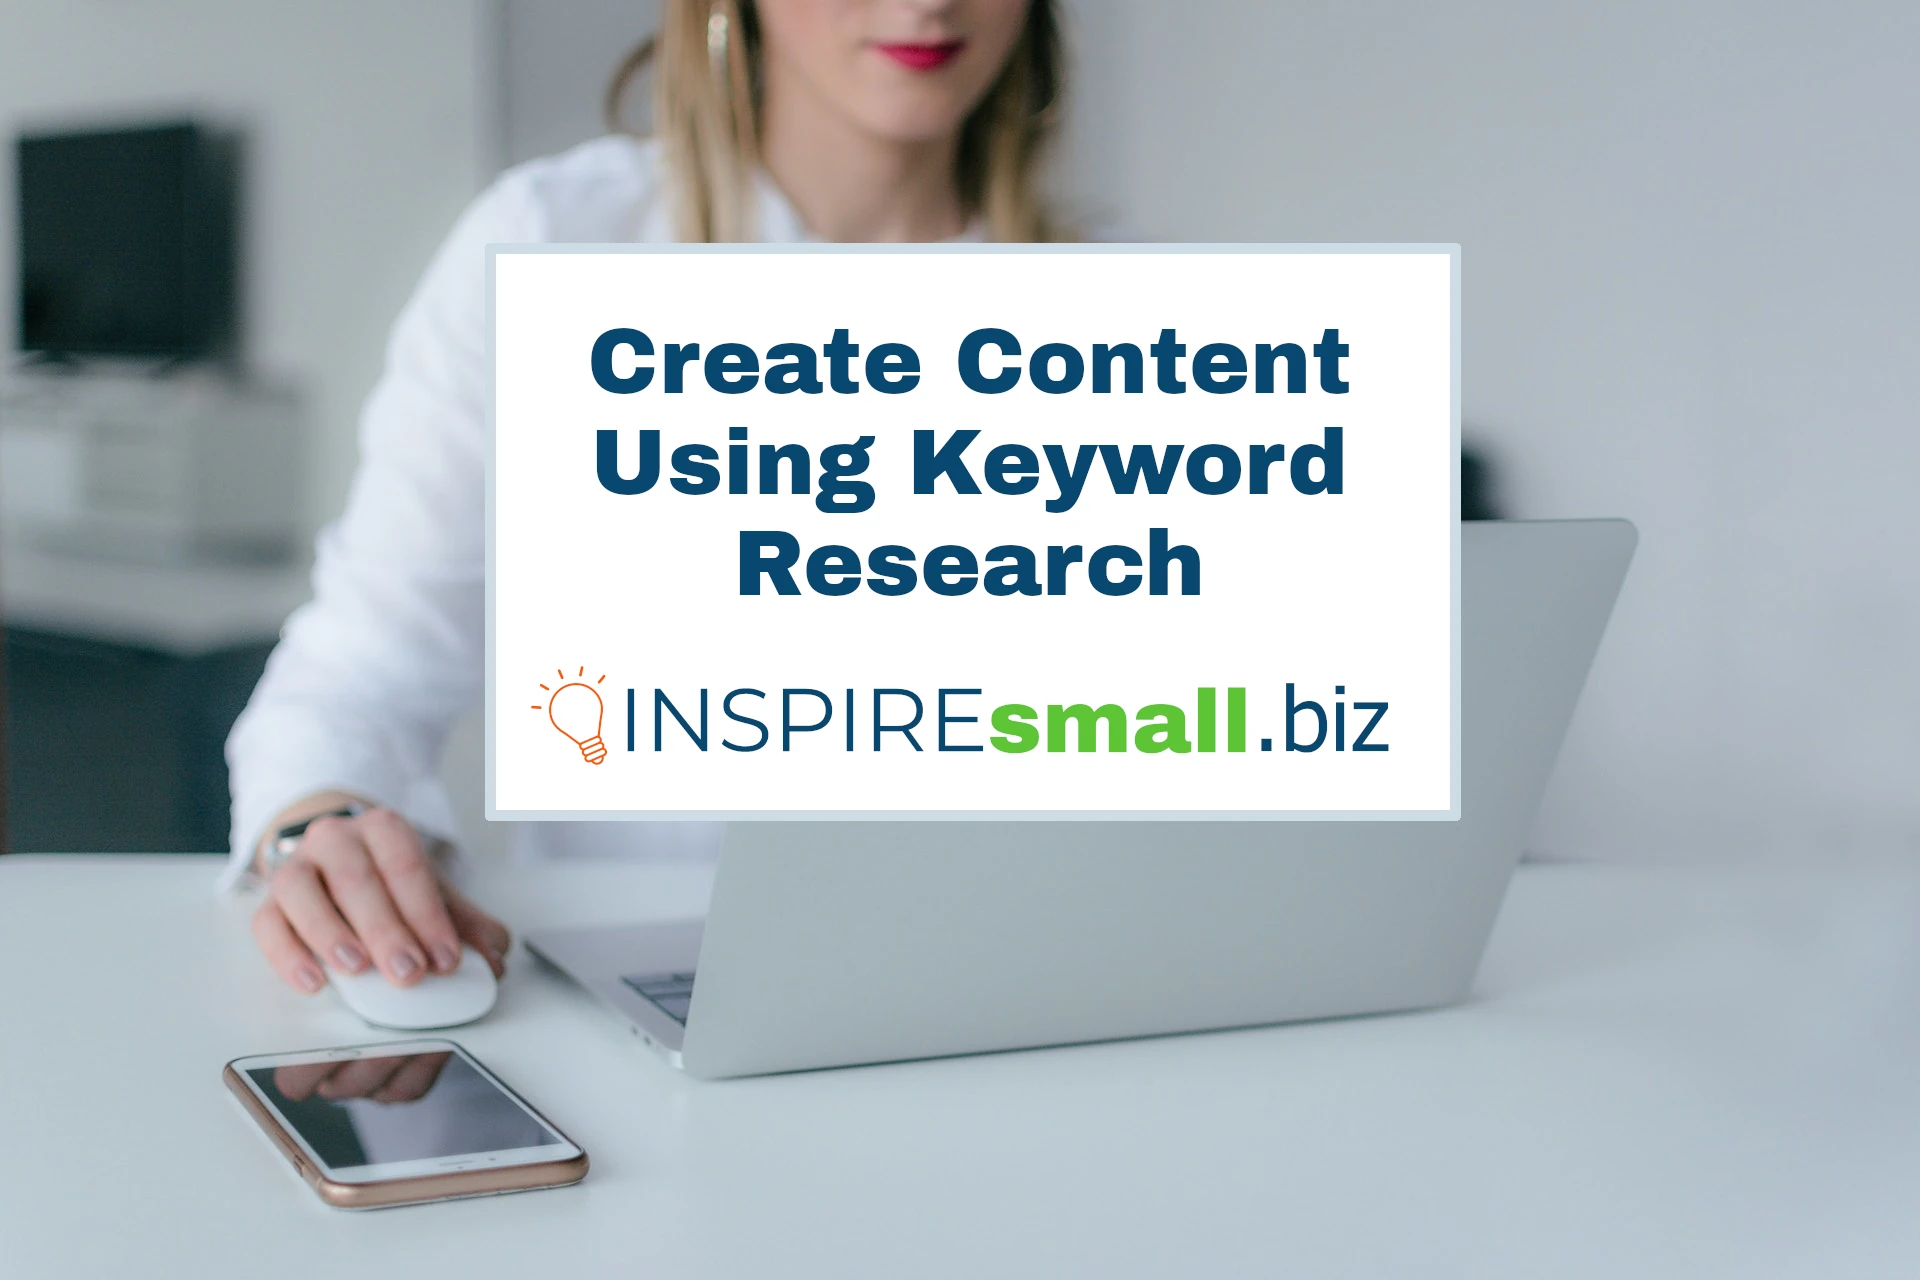 Create Content Using Keyword Research, Business Building Guide from INSPIREsmall.biz